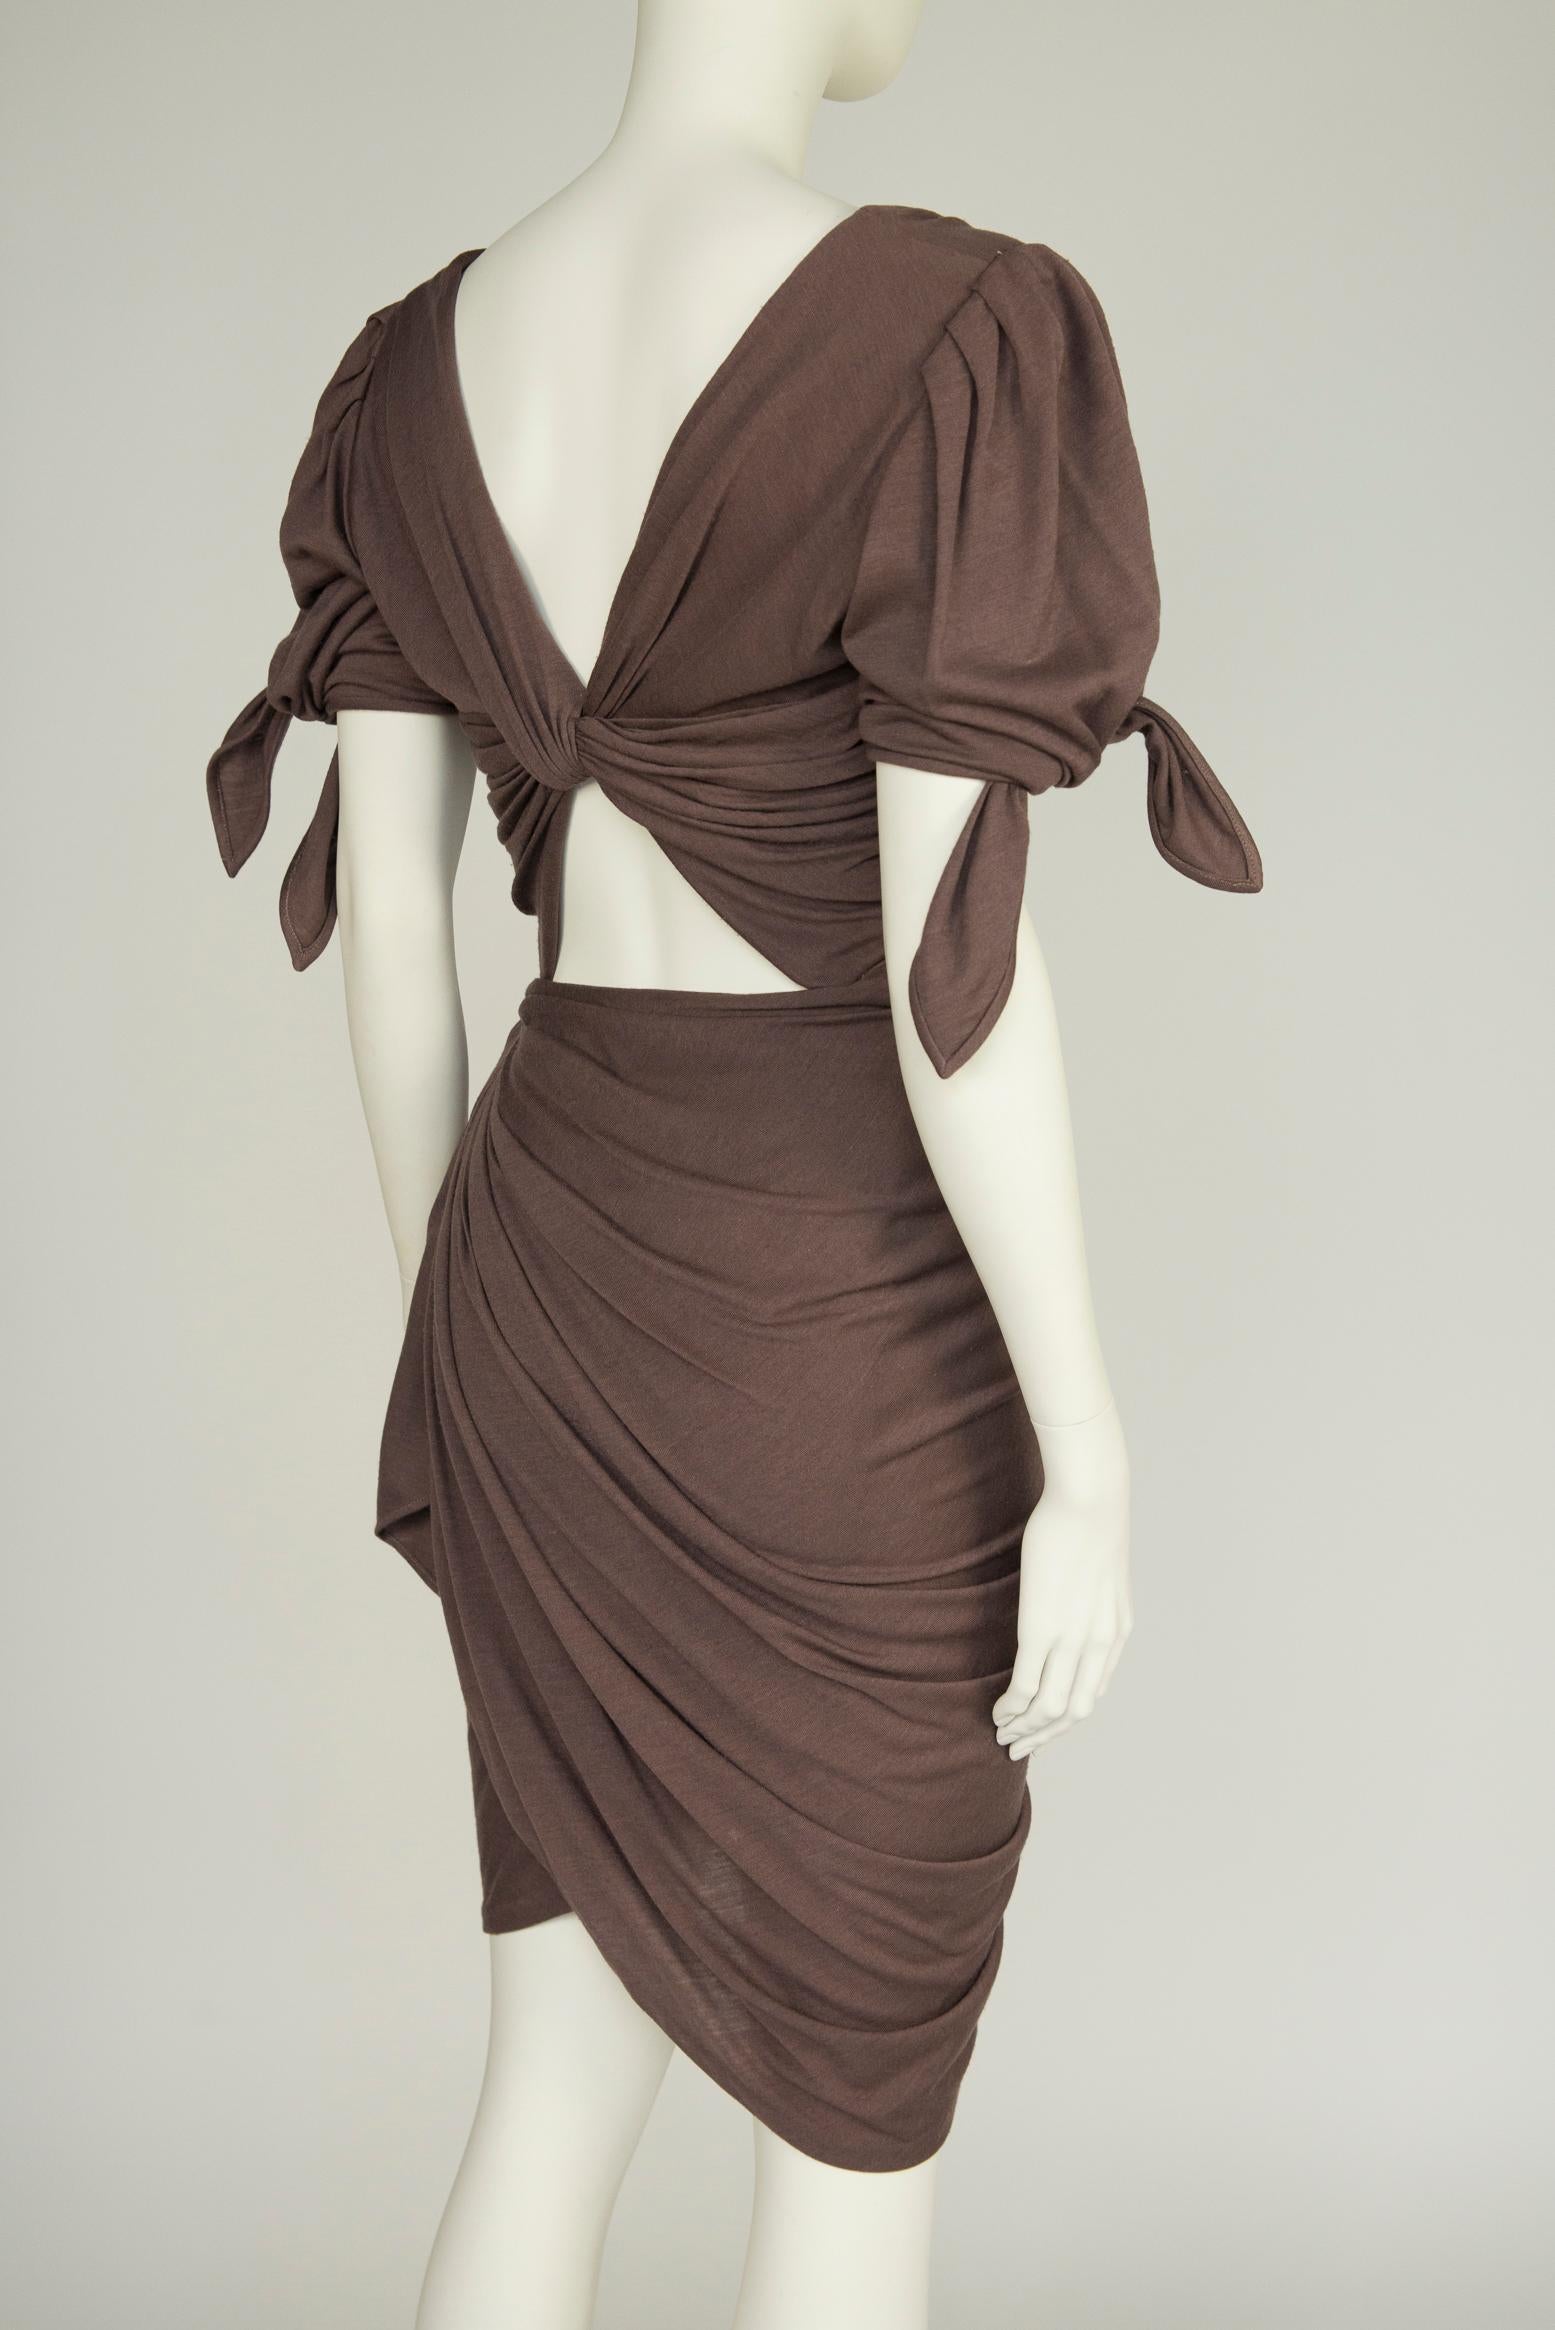 Emanuel Ungaro Draped Knotted Cut-Out Cocktail Dress, Circa 1985 For Sale 3